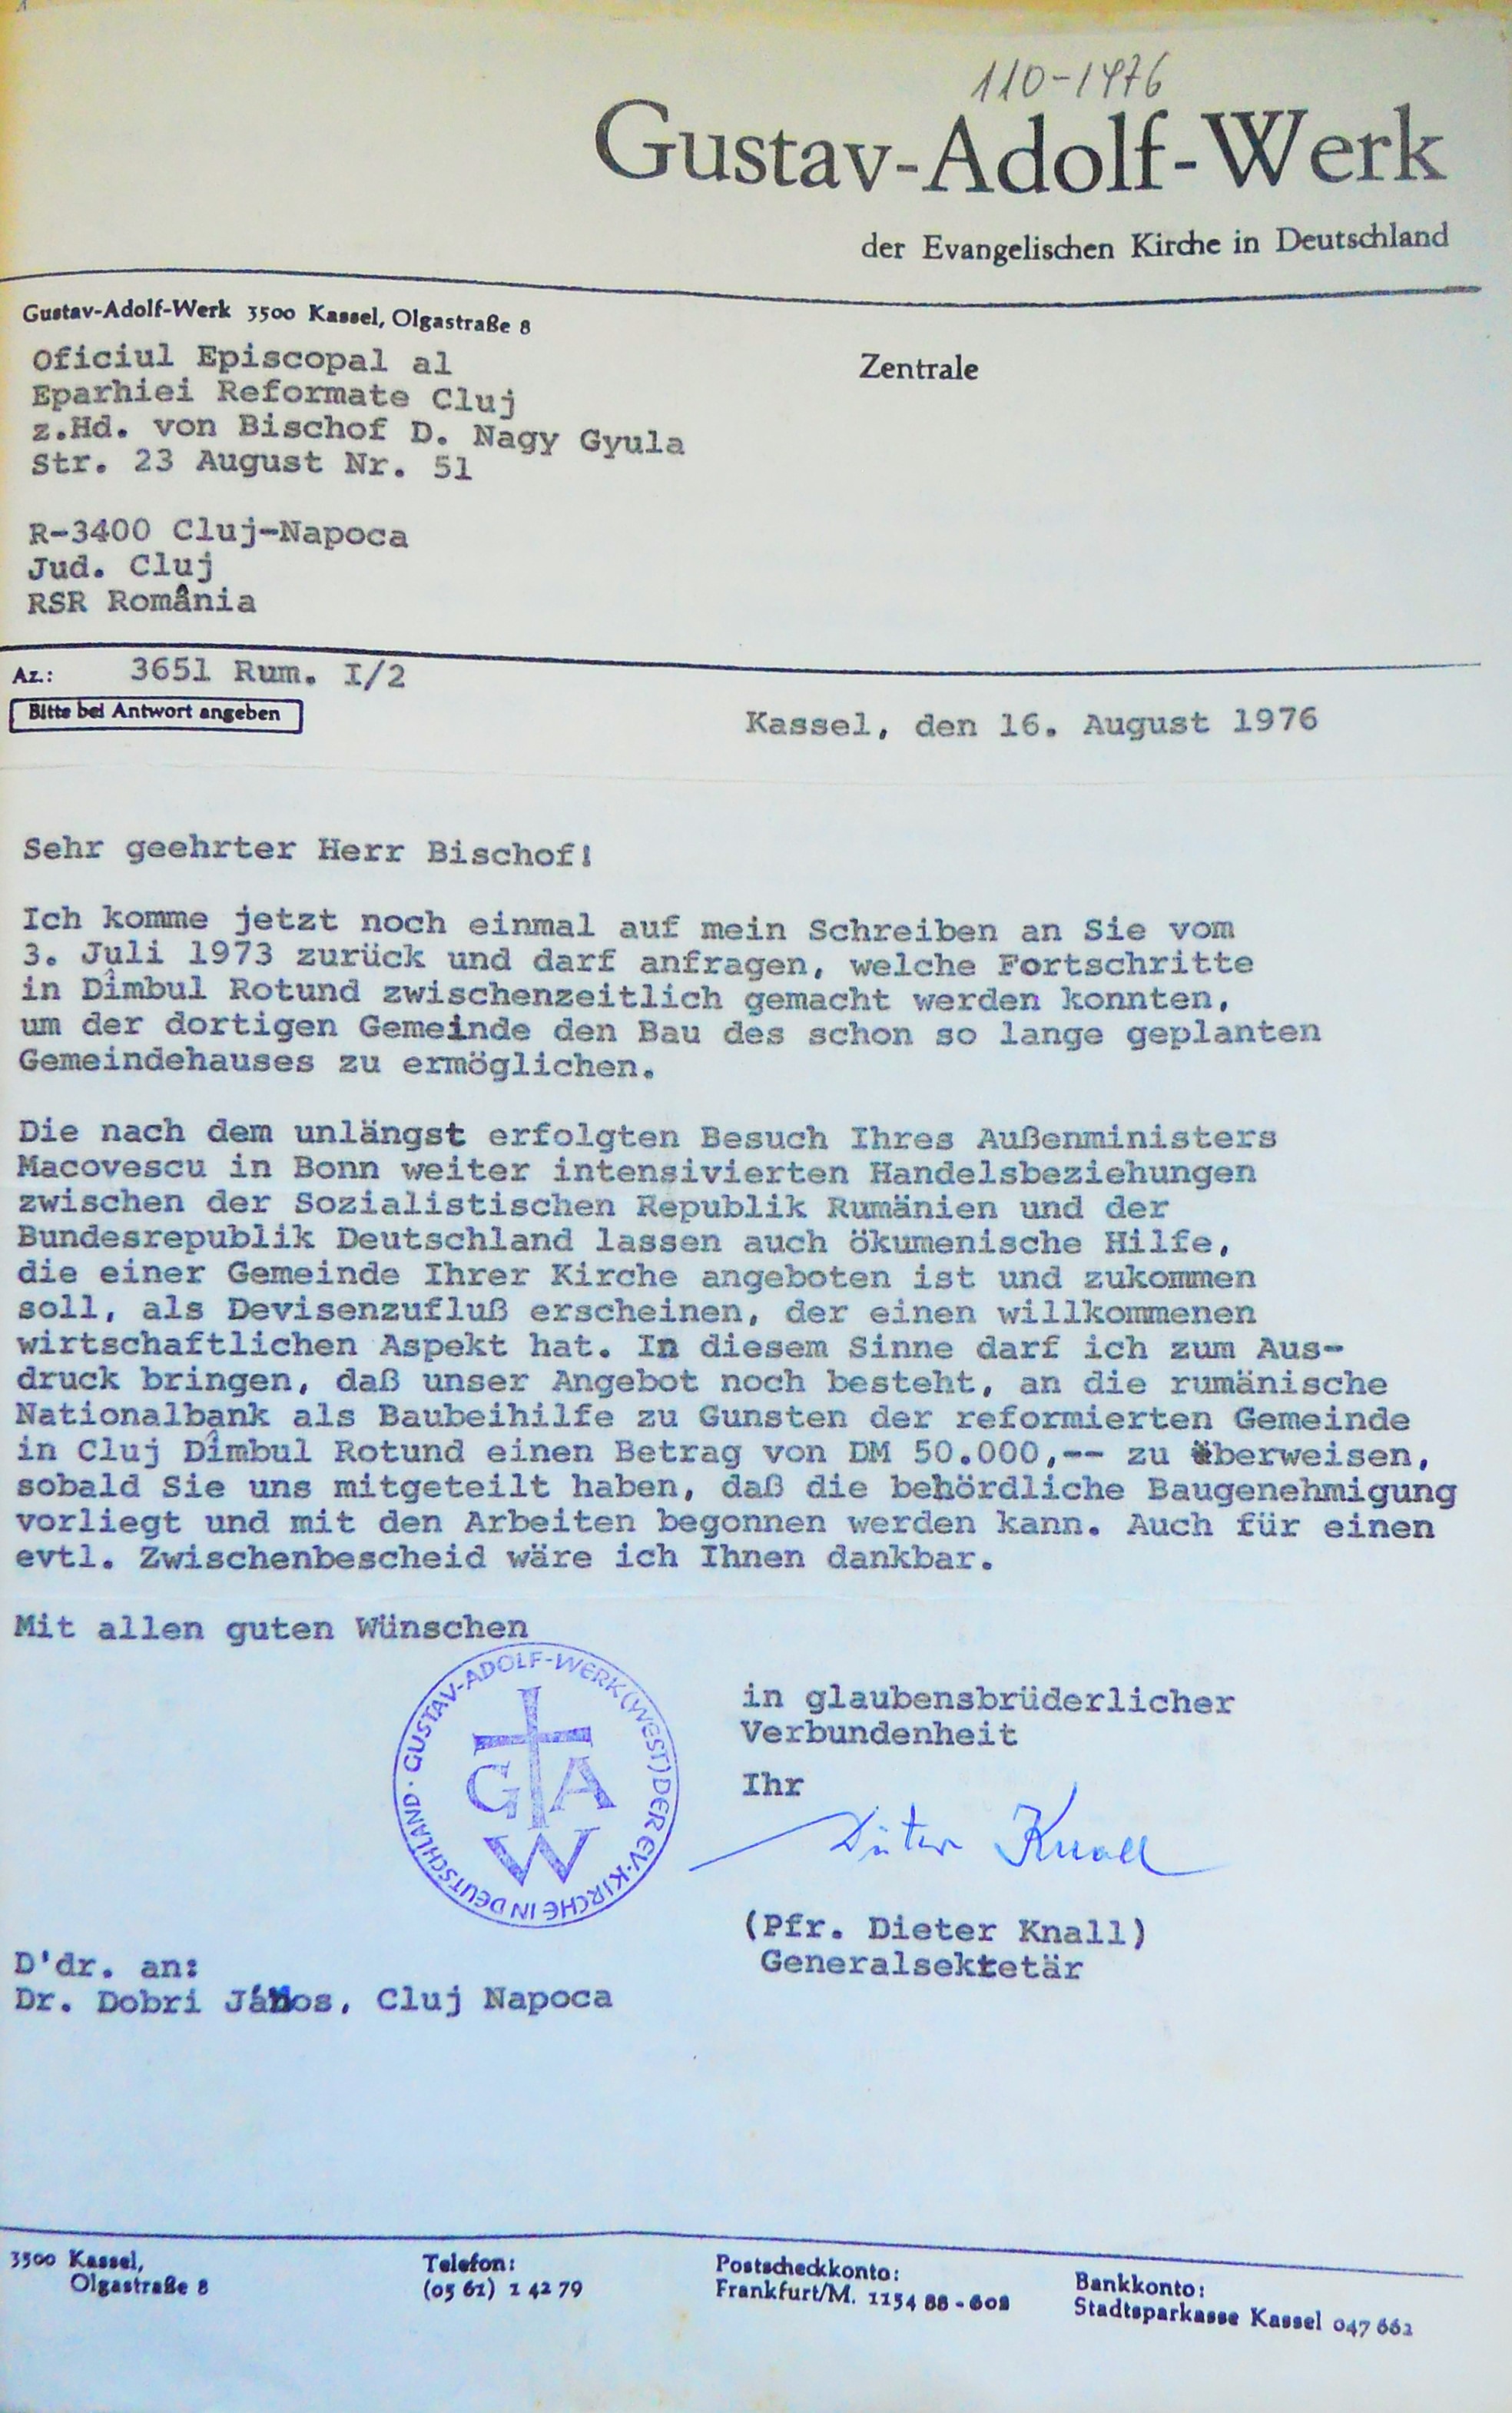 Letter concerning the Gustav Adolf Werk’s donation from Federal Republic of Germany (1976)